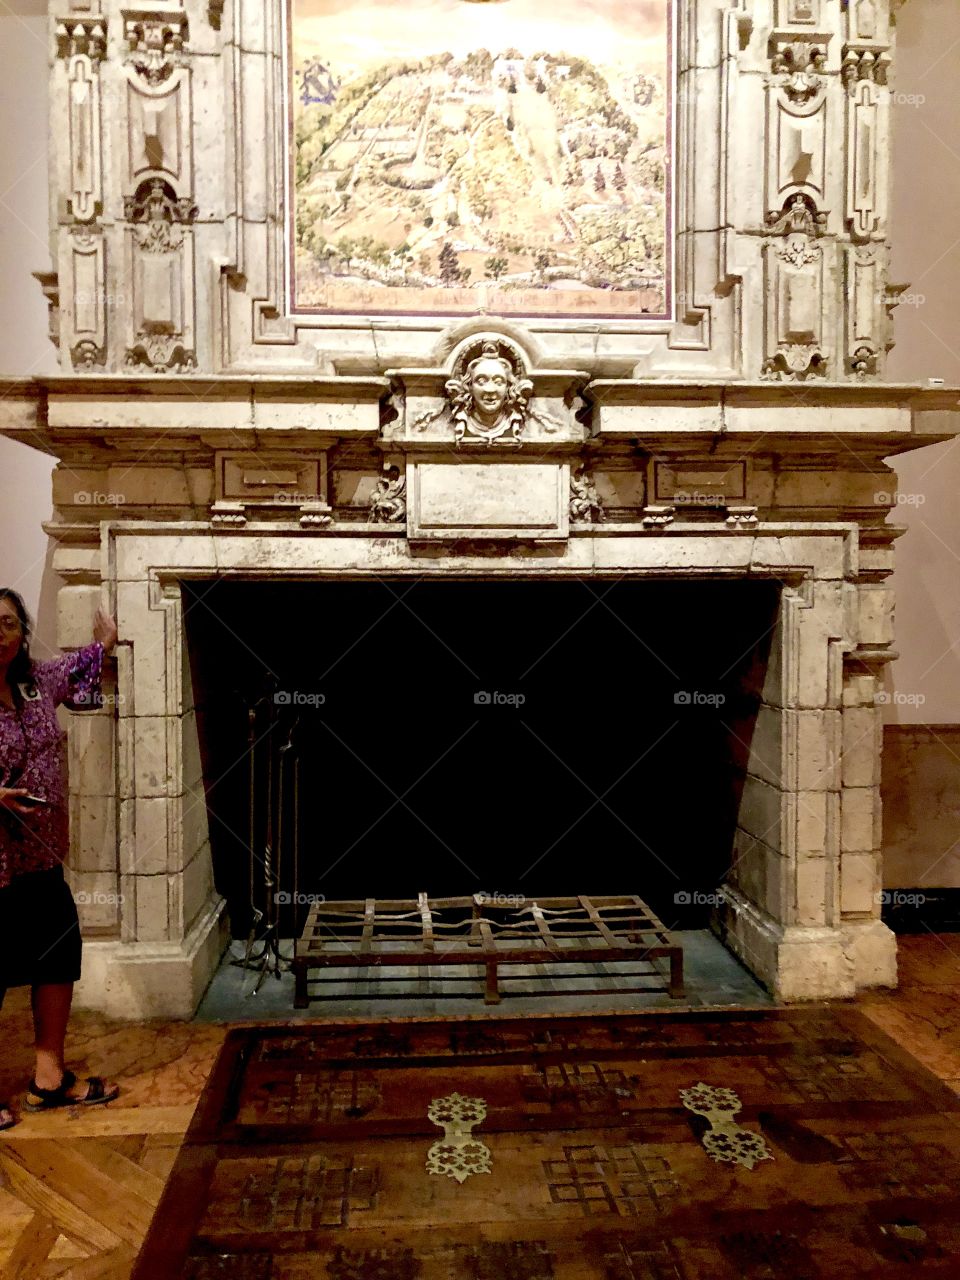 Fireplace in building